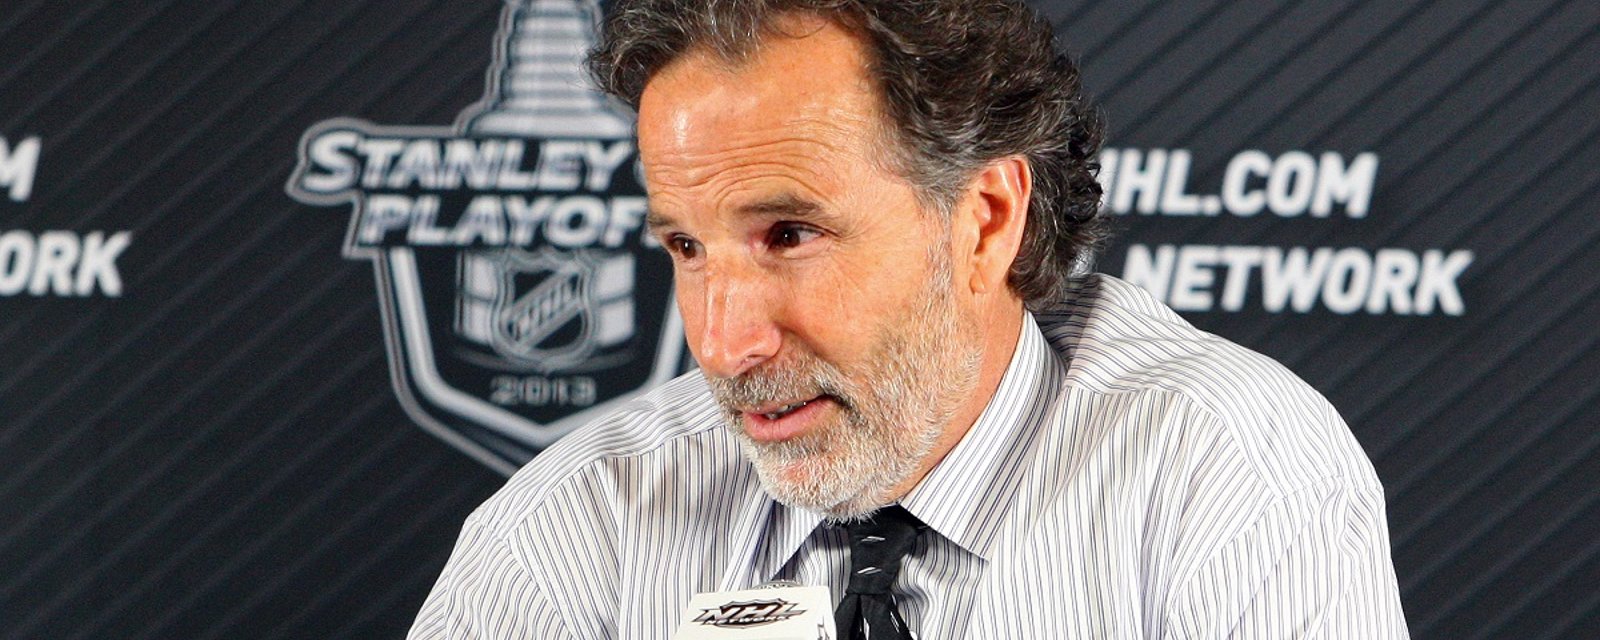 John Tortorella issues a guarantee after his team loses in Game 5!